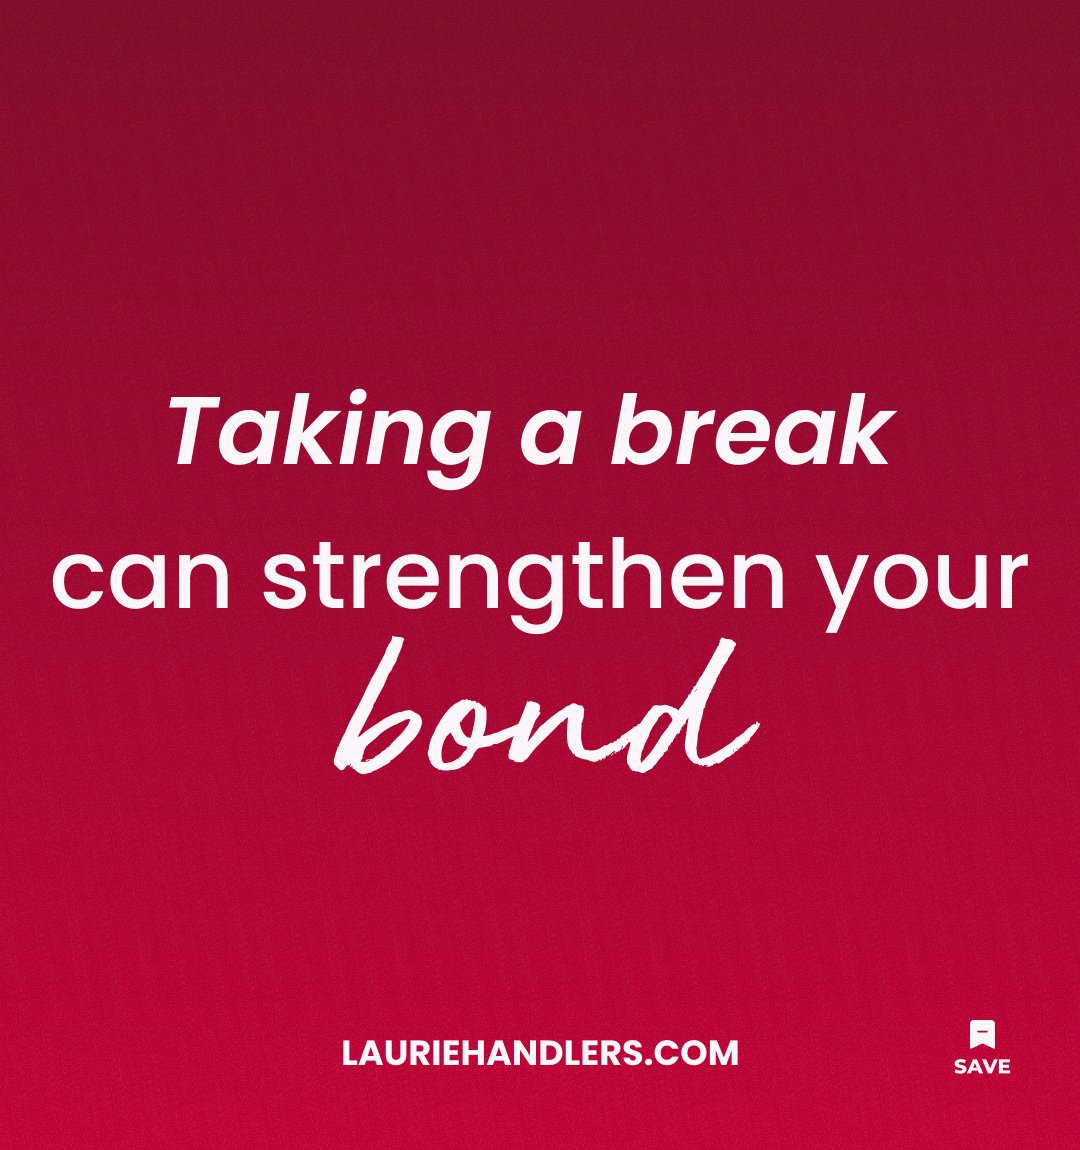 Feeling relationship blues 🥶? Likely just need a breather🌬 Not a break-up, but a shake-up ✔️5-7 days apart might reignite the 🔥💓 Switch it up, stay #extraordinarylovers. Drop thoughts 💬 below! \u000A#lauriehandlers #ding🚶‍♀️🚶‍♂️✨